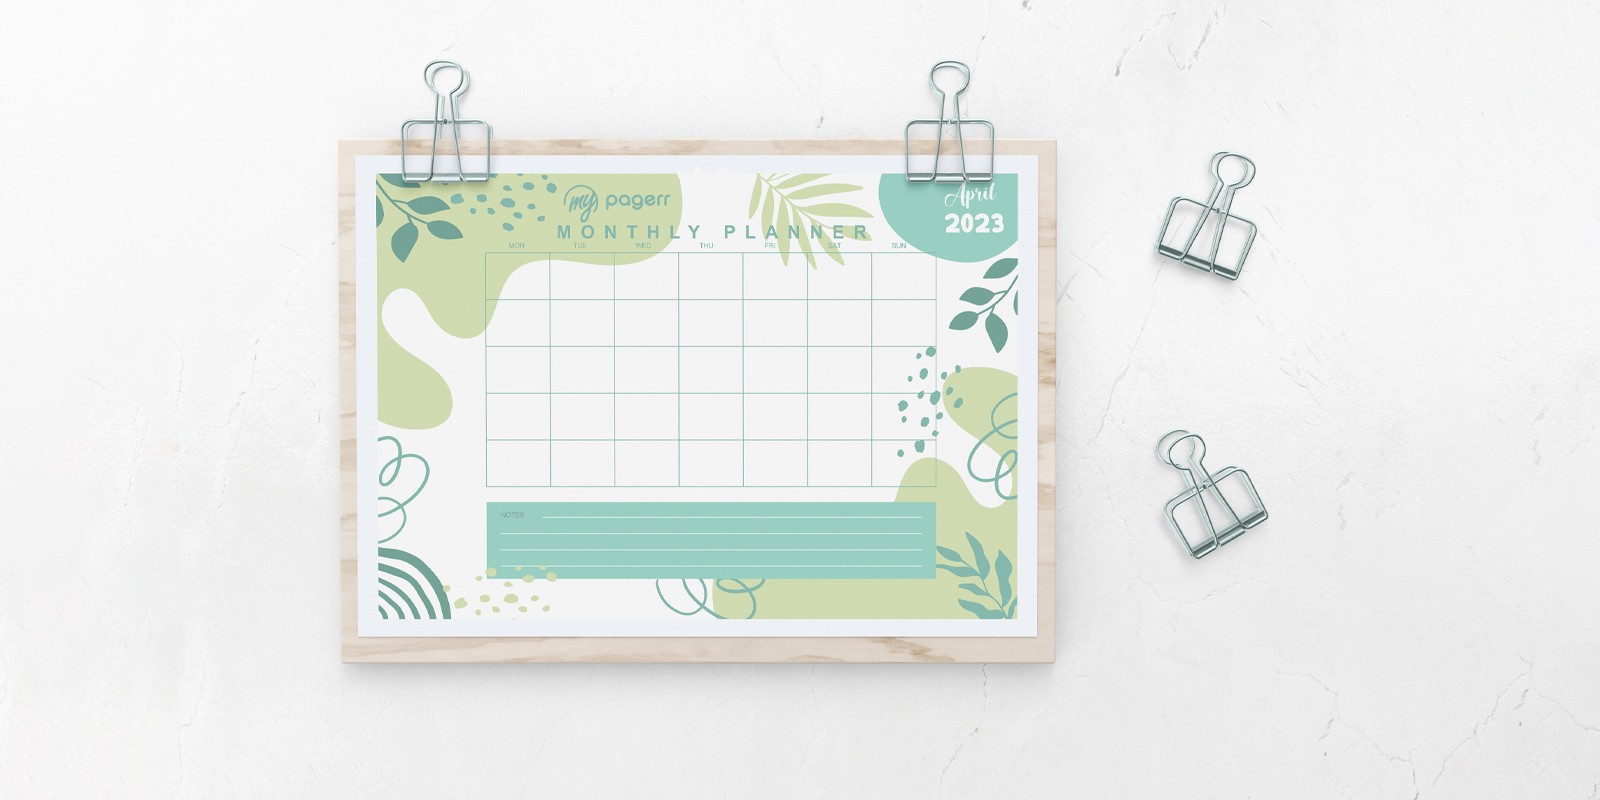 Calendar planners in Madrid - Print with Pagerr